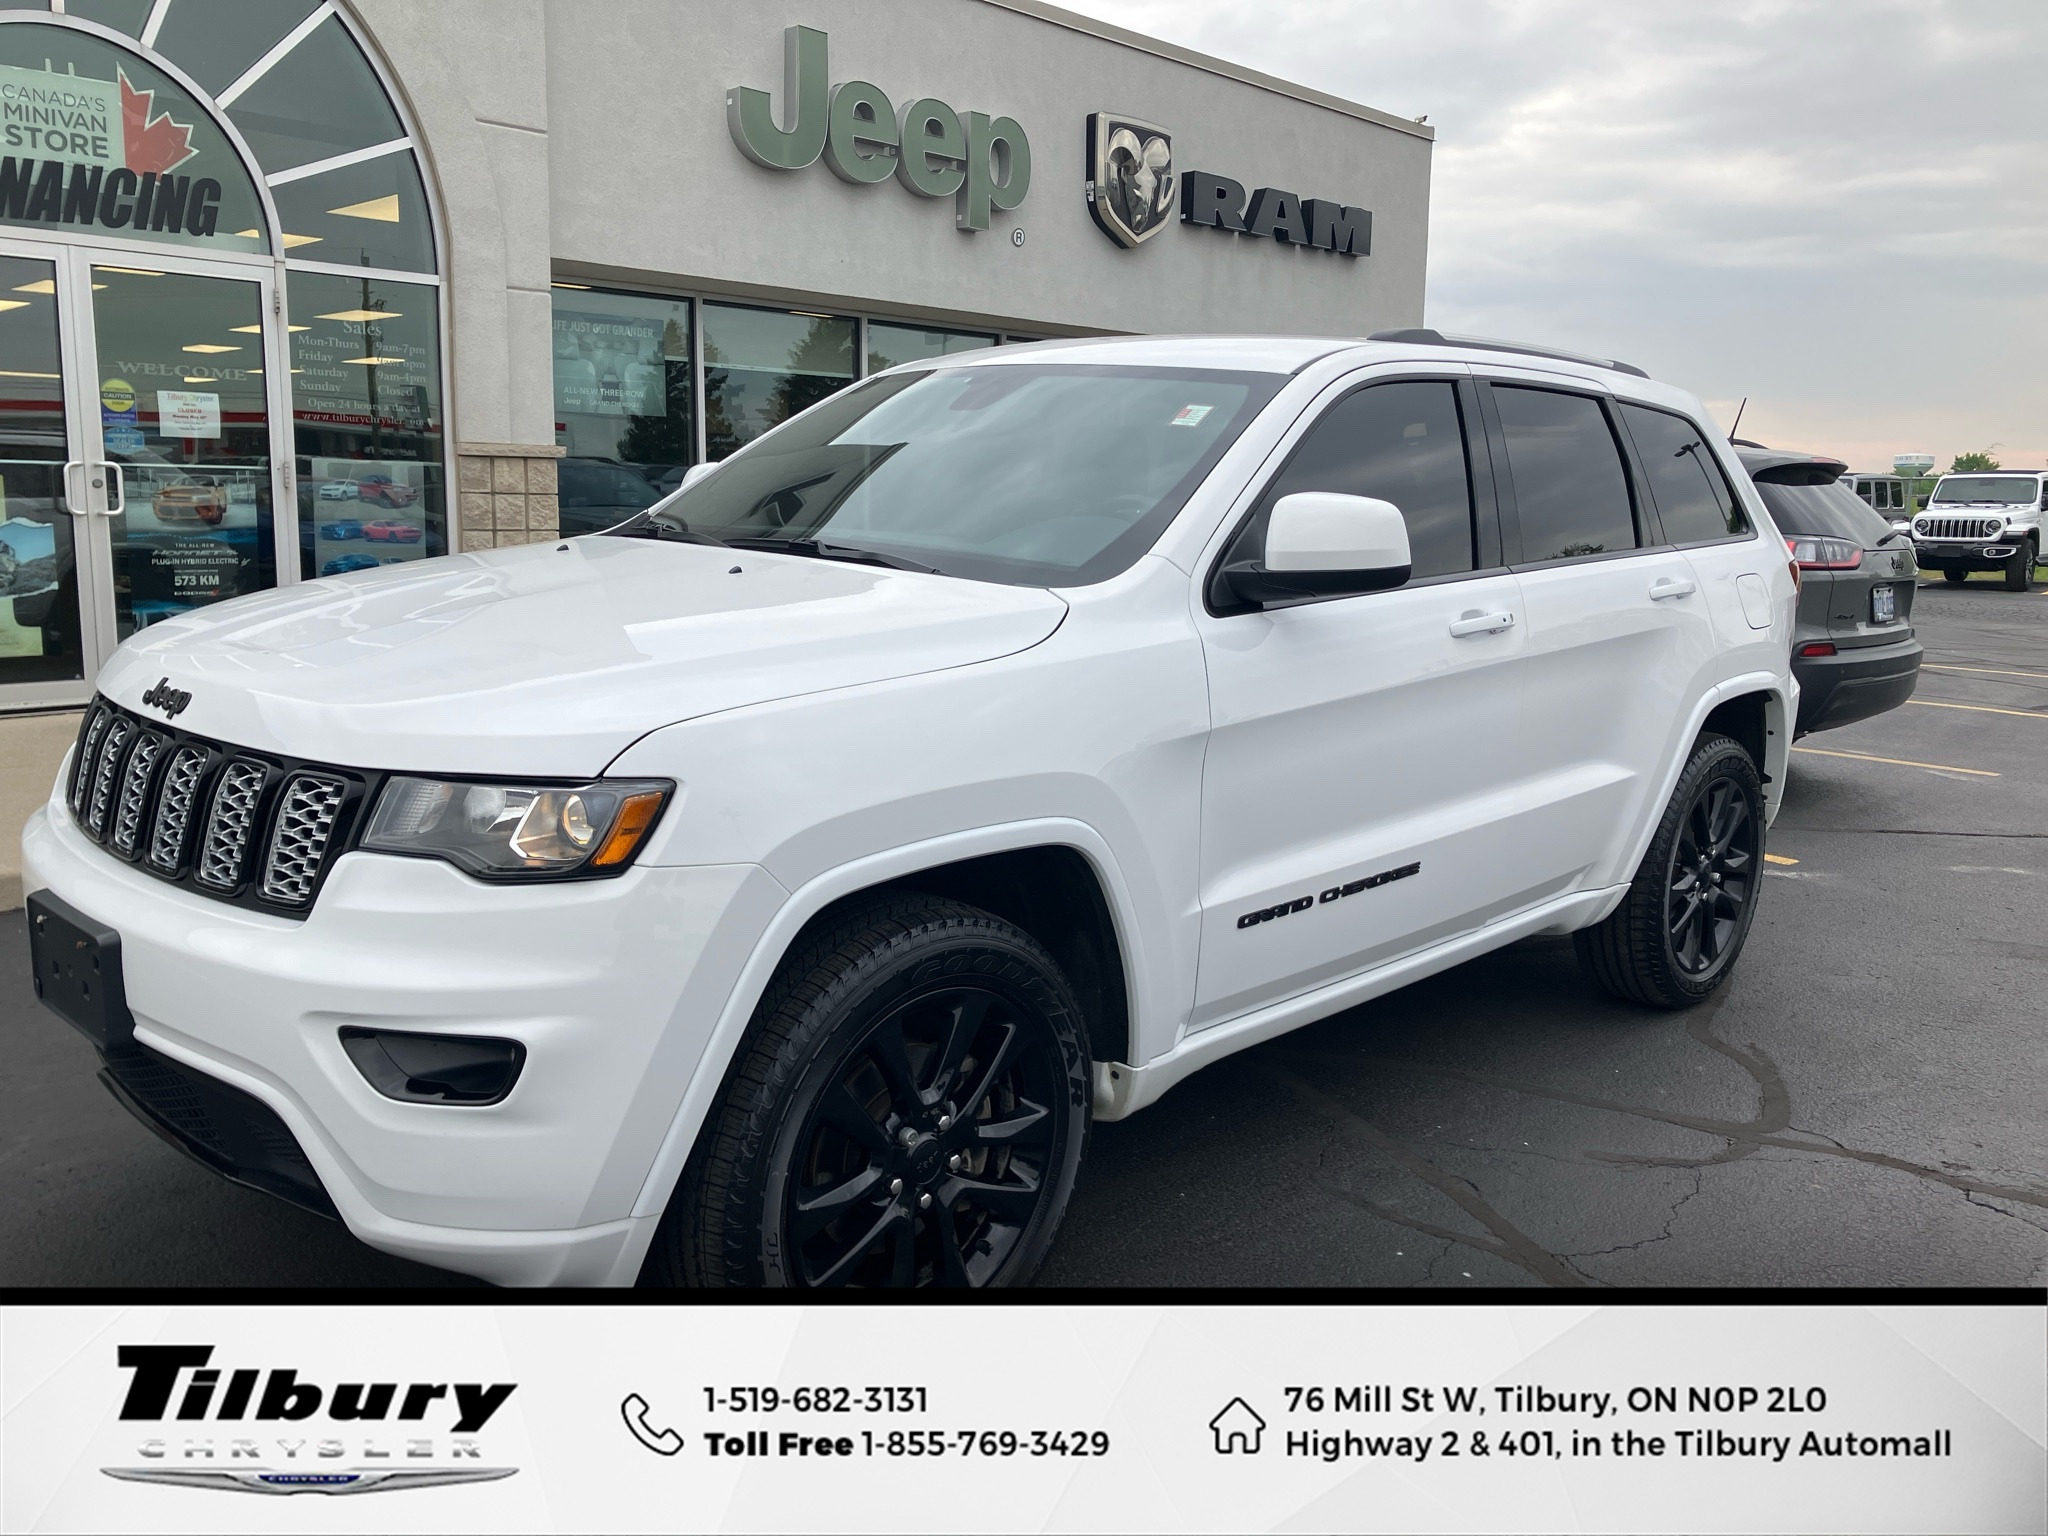 2020 Jeep Grand Cherokee One Owner, Trailer Tow Package